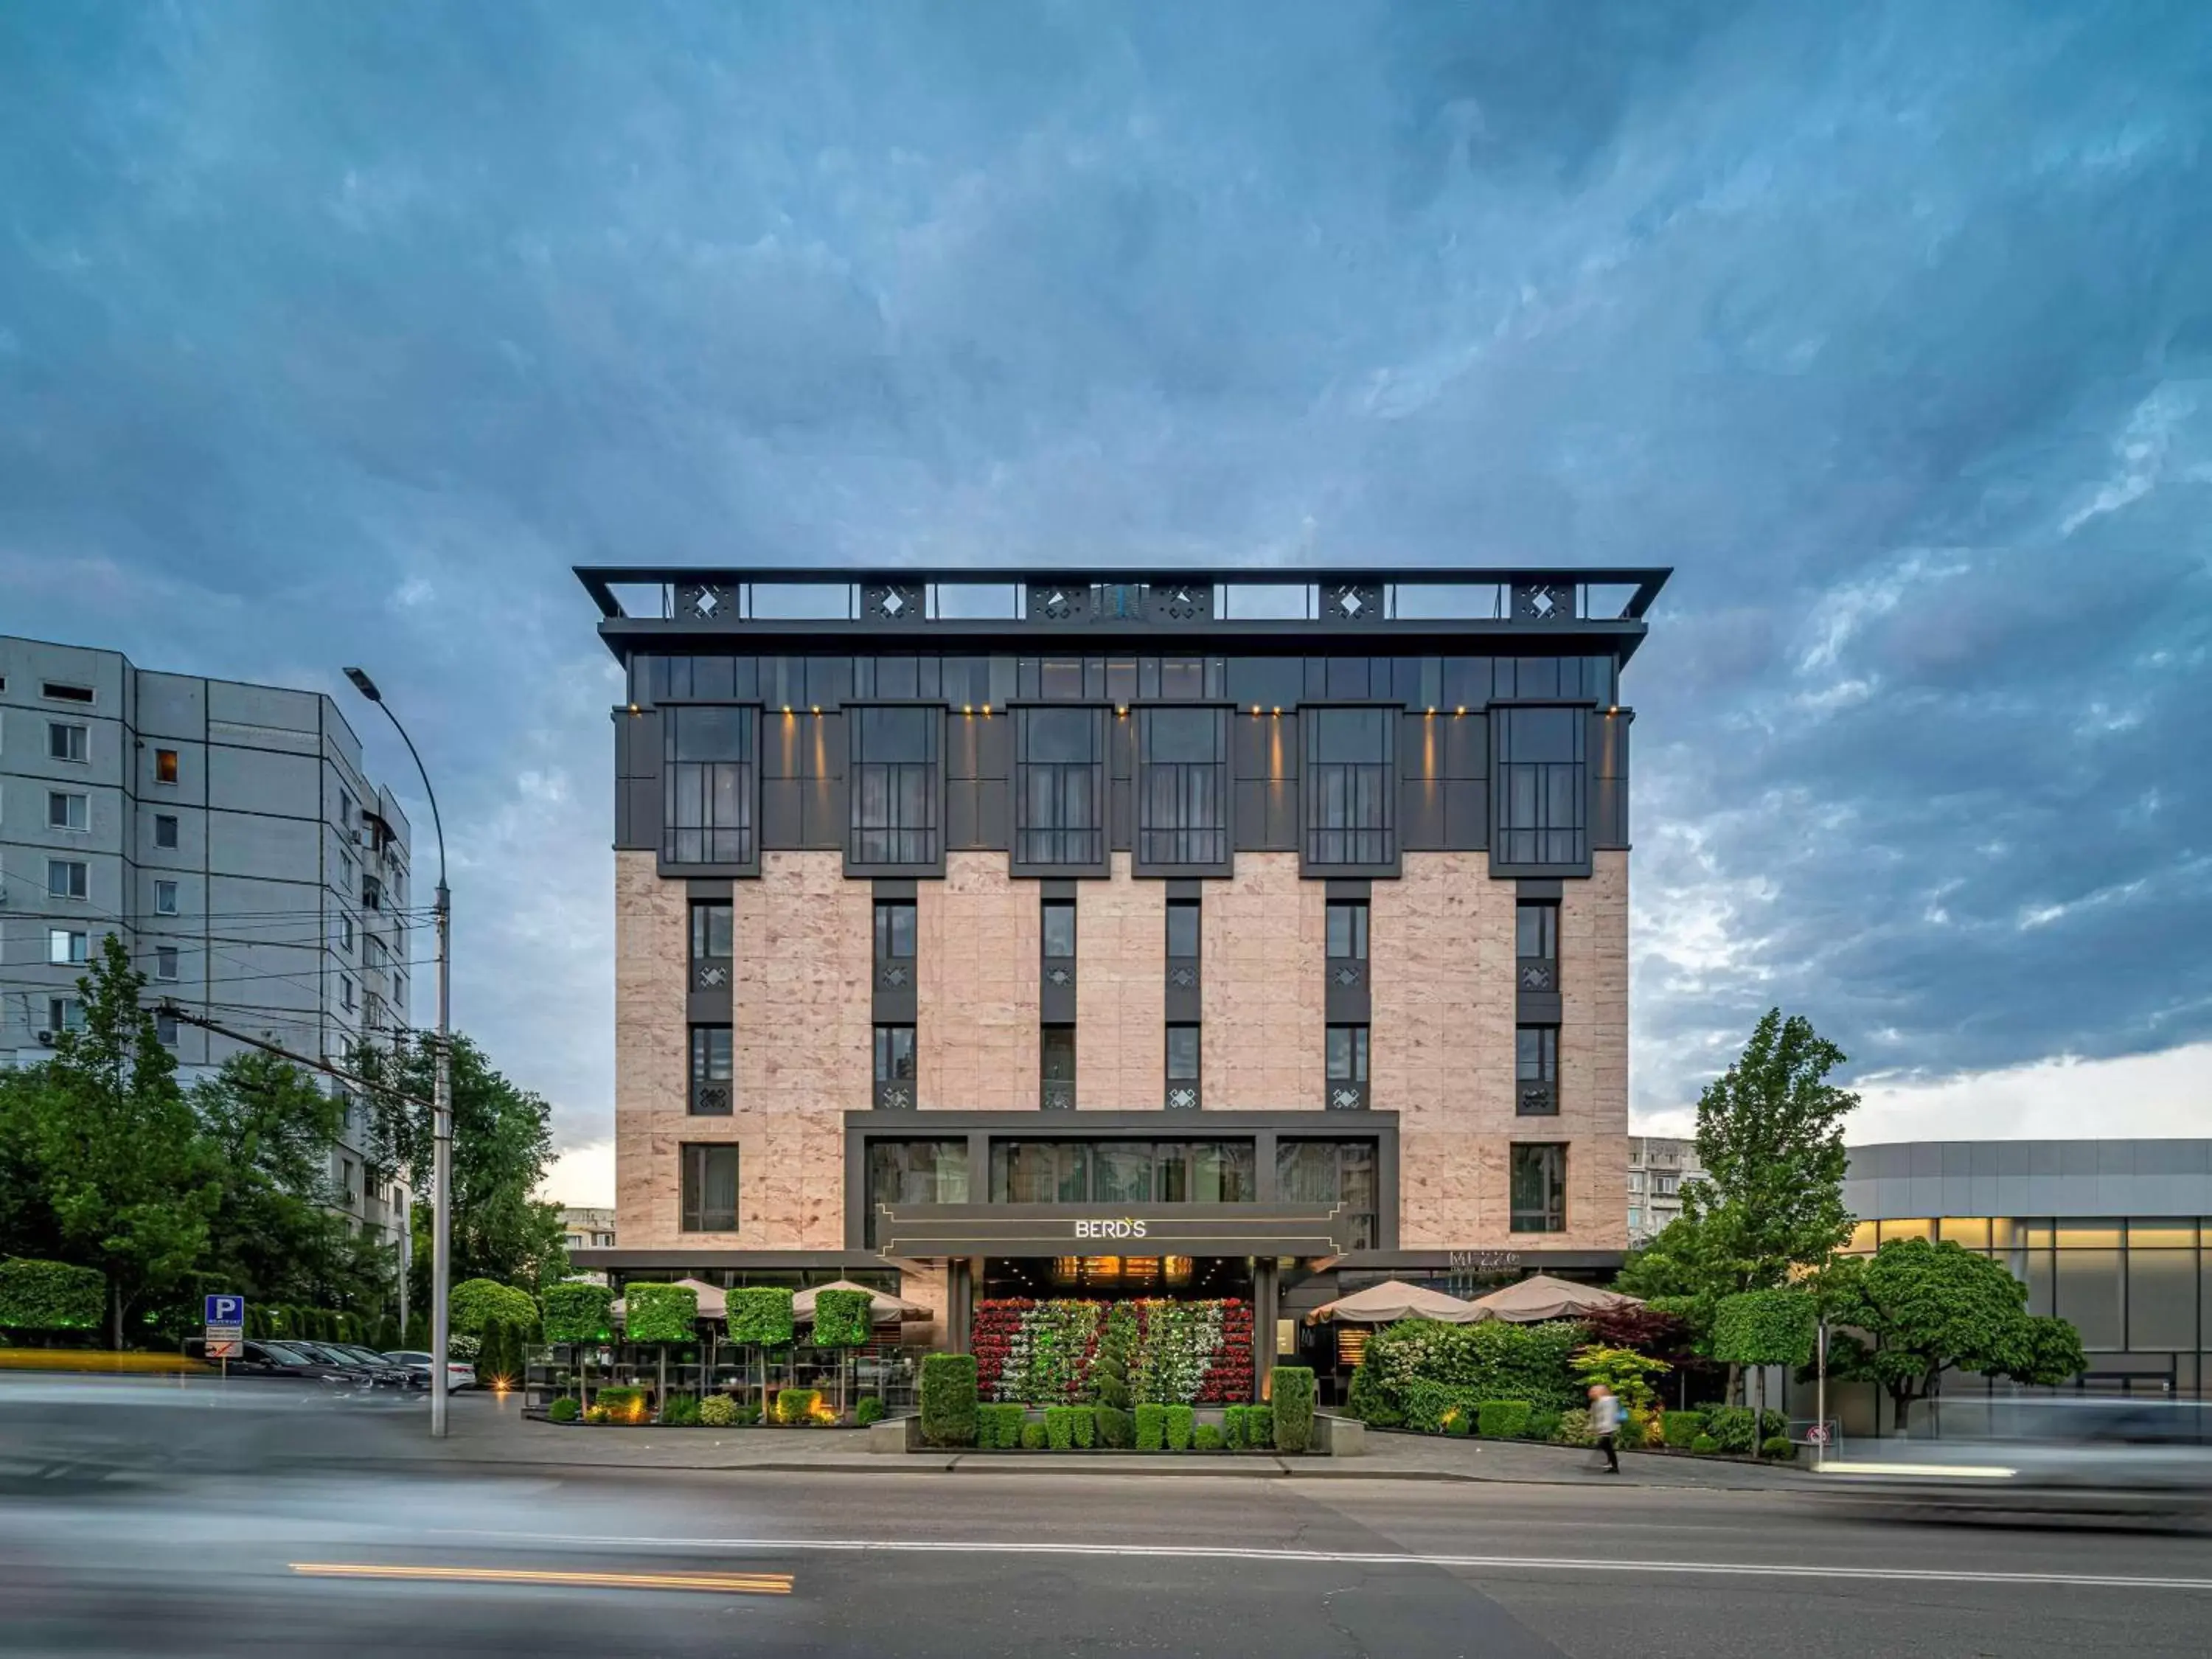 Property Building in BERDS Chisinau Mgallery Hotel Collection